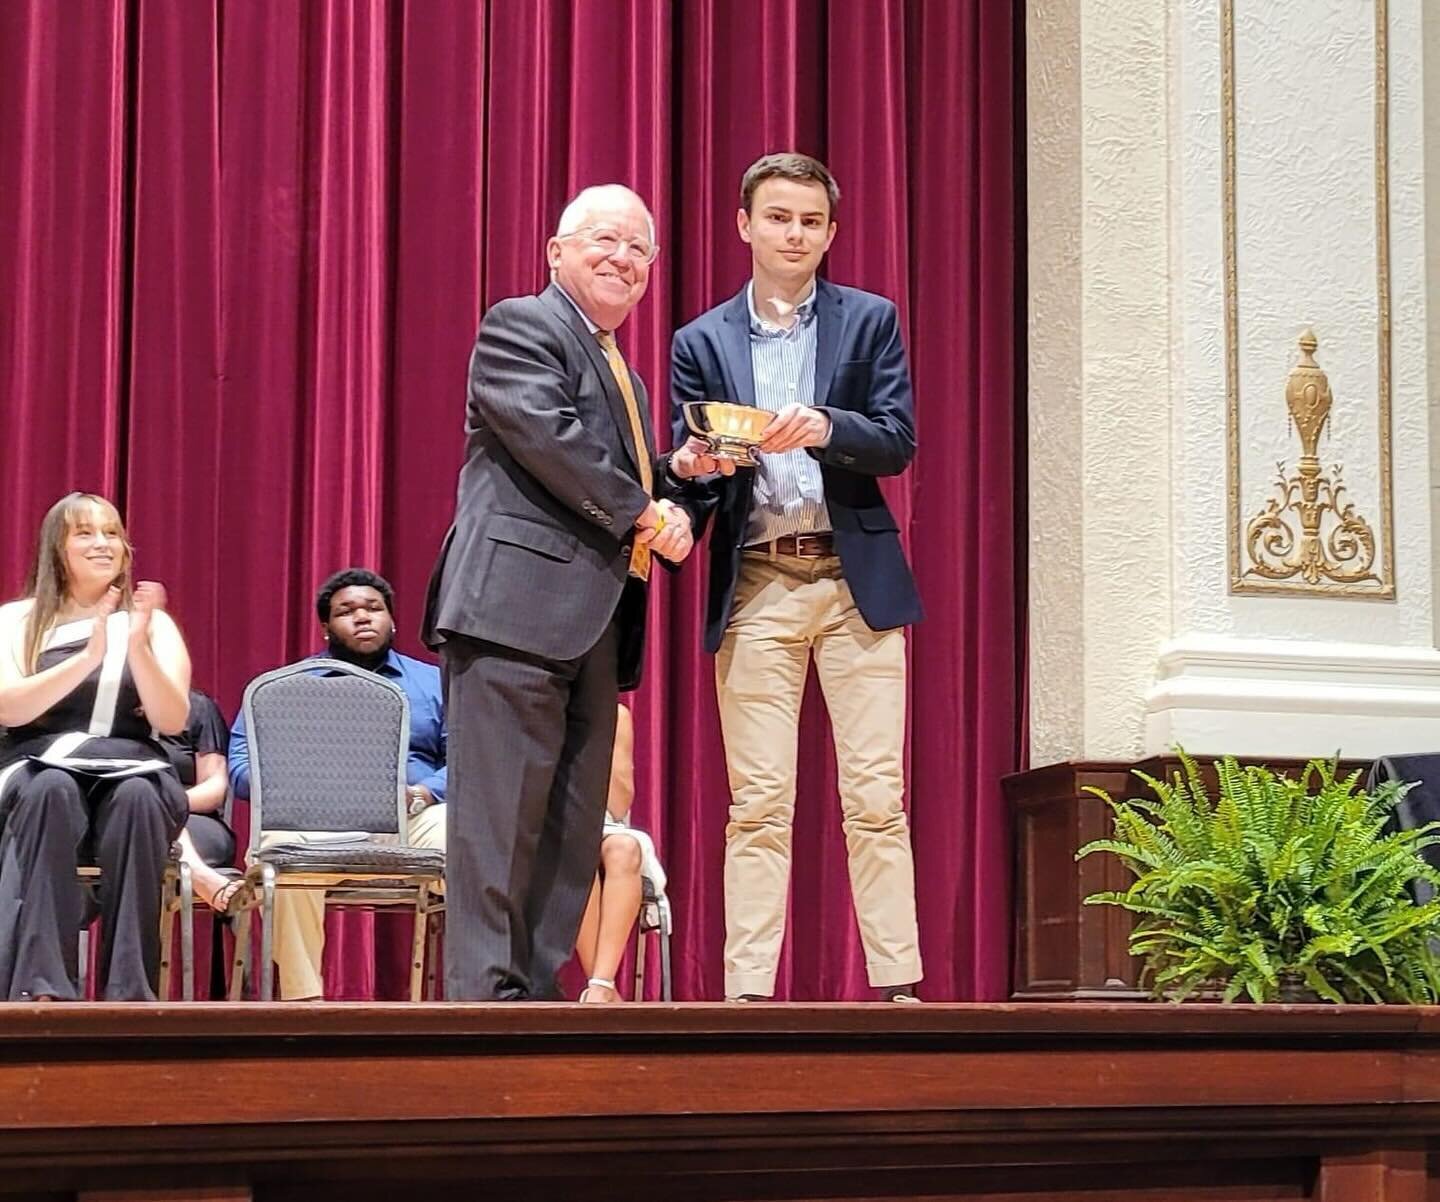 @macmccormick19 was awarded the Phi Kappa Pho Silver Bowl for highest number of total credit hours and GPA at the @officialsouthernmiss awards ceremony! Way to go Mac! Always doing @clemonslab proud! 🦅